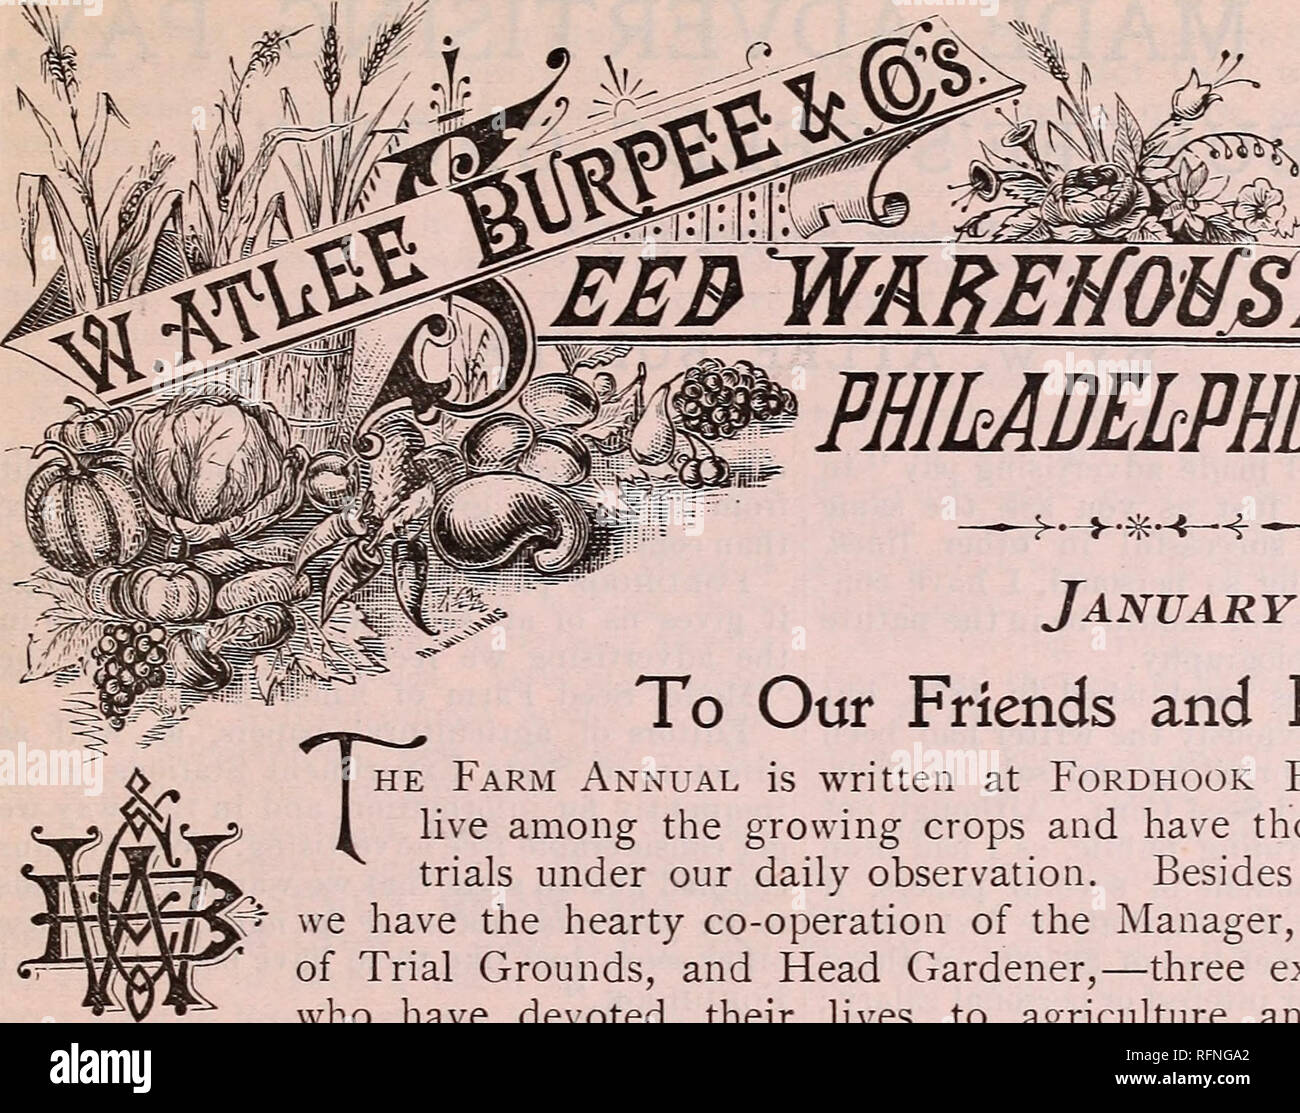 . Burpee's farm annual written at Fordhook Farm. Nurseries (Horticulture) Pennsylvania Philadelphia Catalogs; Vegetables Seeds Catalogs; Plants, Ornamental Catalogs; Flowers Seeds Catalogs. W, ,1 PHILADELPHIA Pi. January i, i8g?. To Our Friends and Patrons:— Farm Annual is written at Fordhook Farm, where we live among the growing crops and have thousands of field trials under our daily observation. Besides able assistants, we have the hearty co-operation of the Manager, Superintendent of Trial Grounds, and Head Gardener,—three experienced men who have devoted their lives to agriculture and hor Stock Photo